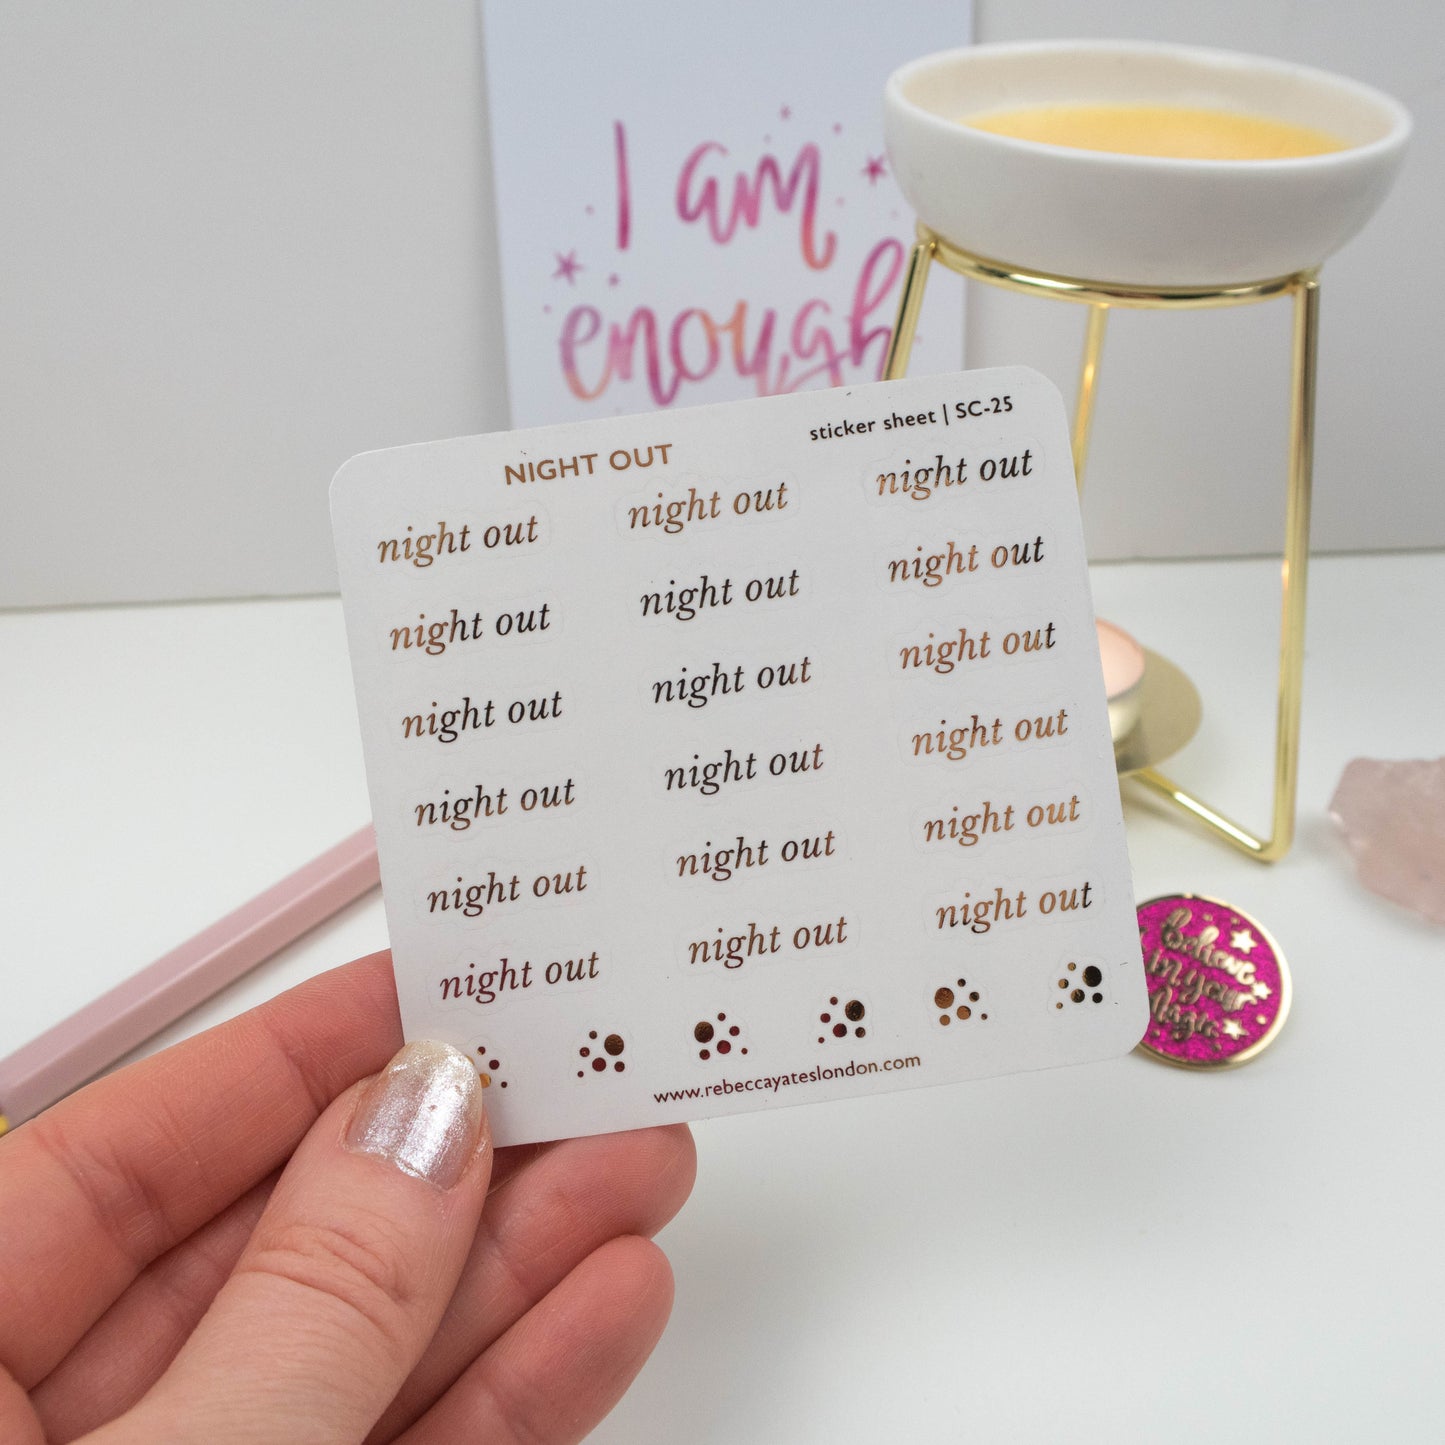 NIGHT OUT - FOILED SCRIPT STICKERS